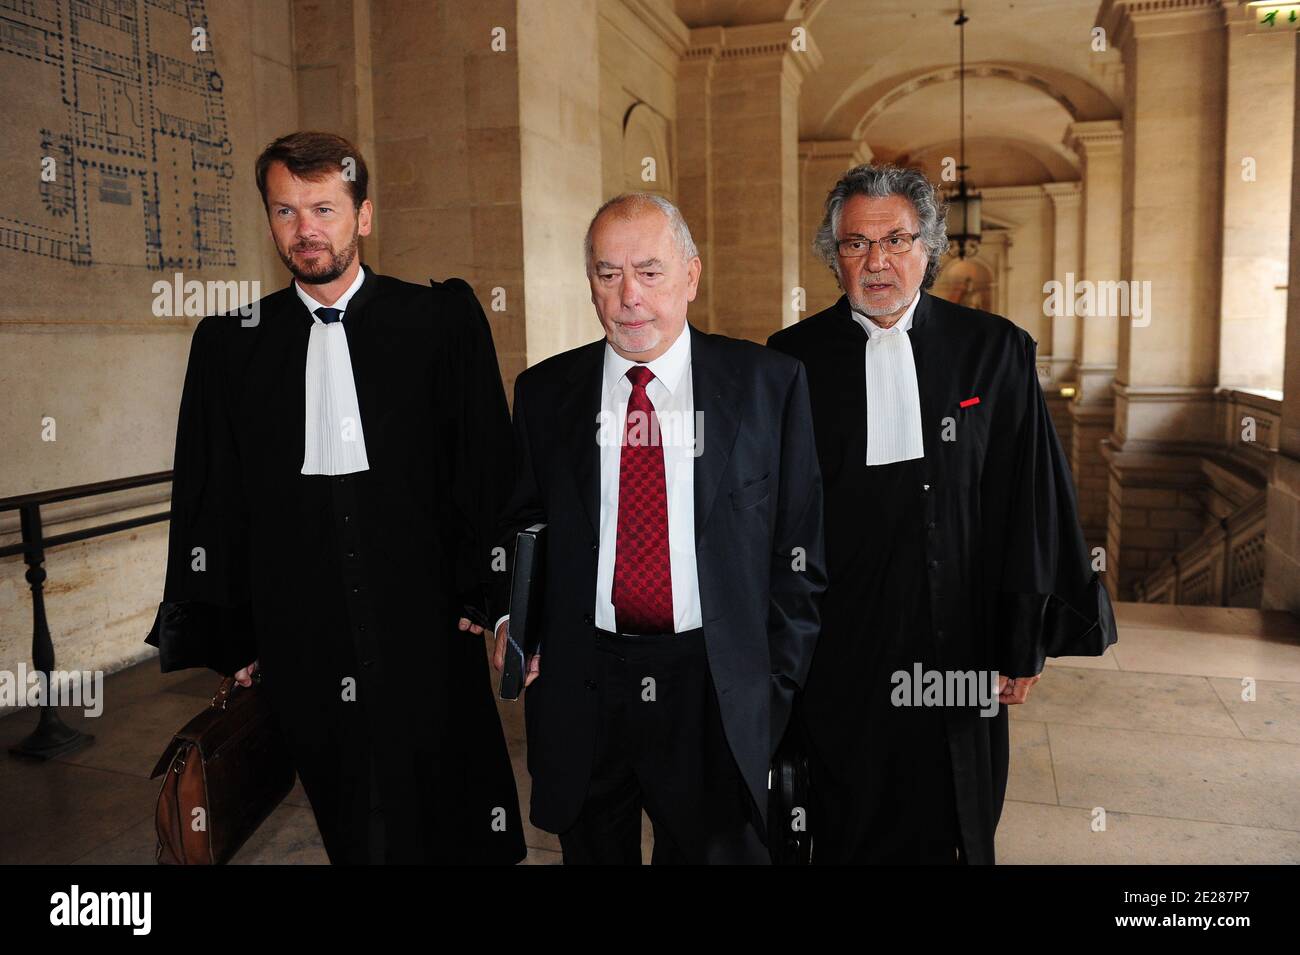 Former French Trade Union Force Ouvriere leader Marc Blondel (C) flanked by  lawyer Jean-Louis Pelletier arrives at the Paris' courthouse, France on  September 5, 2011 for the opening of former France's president